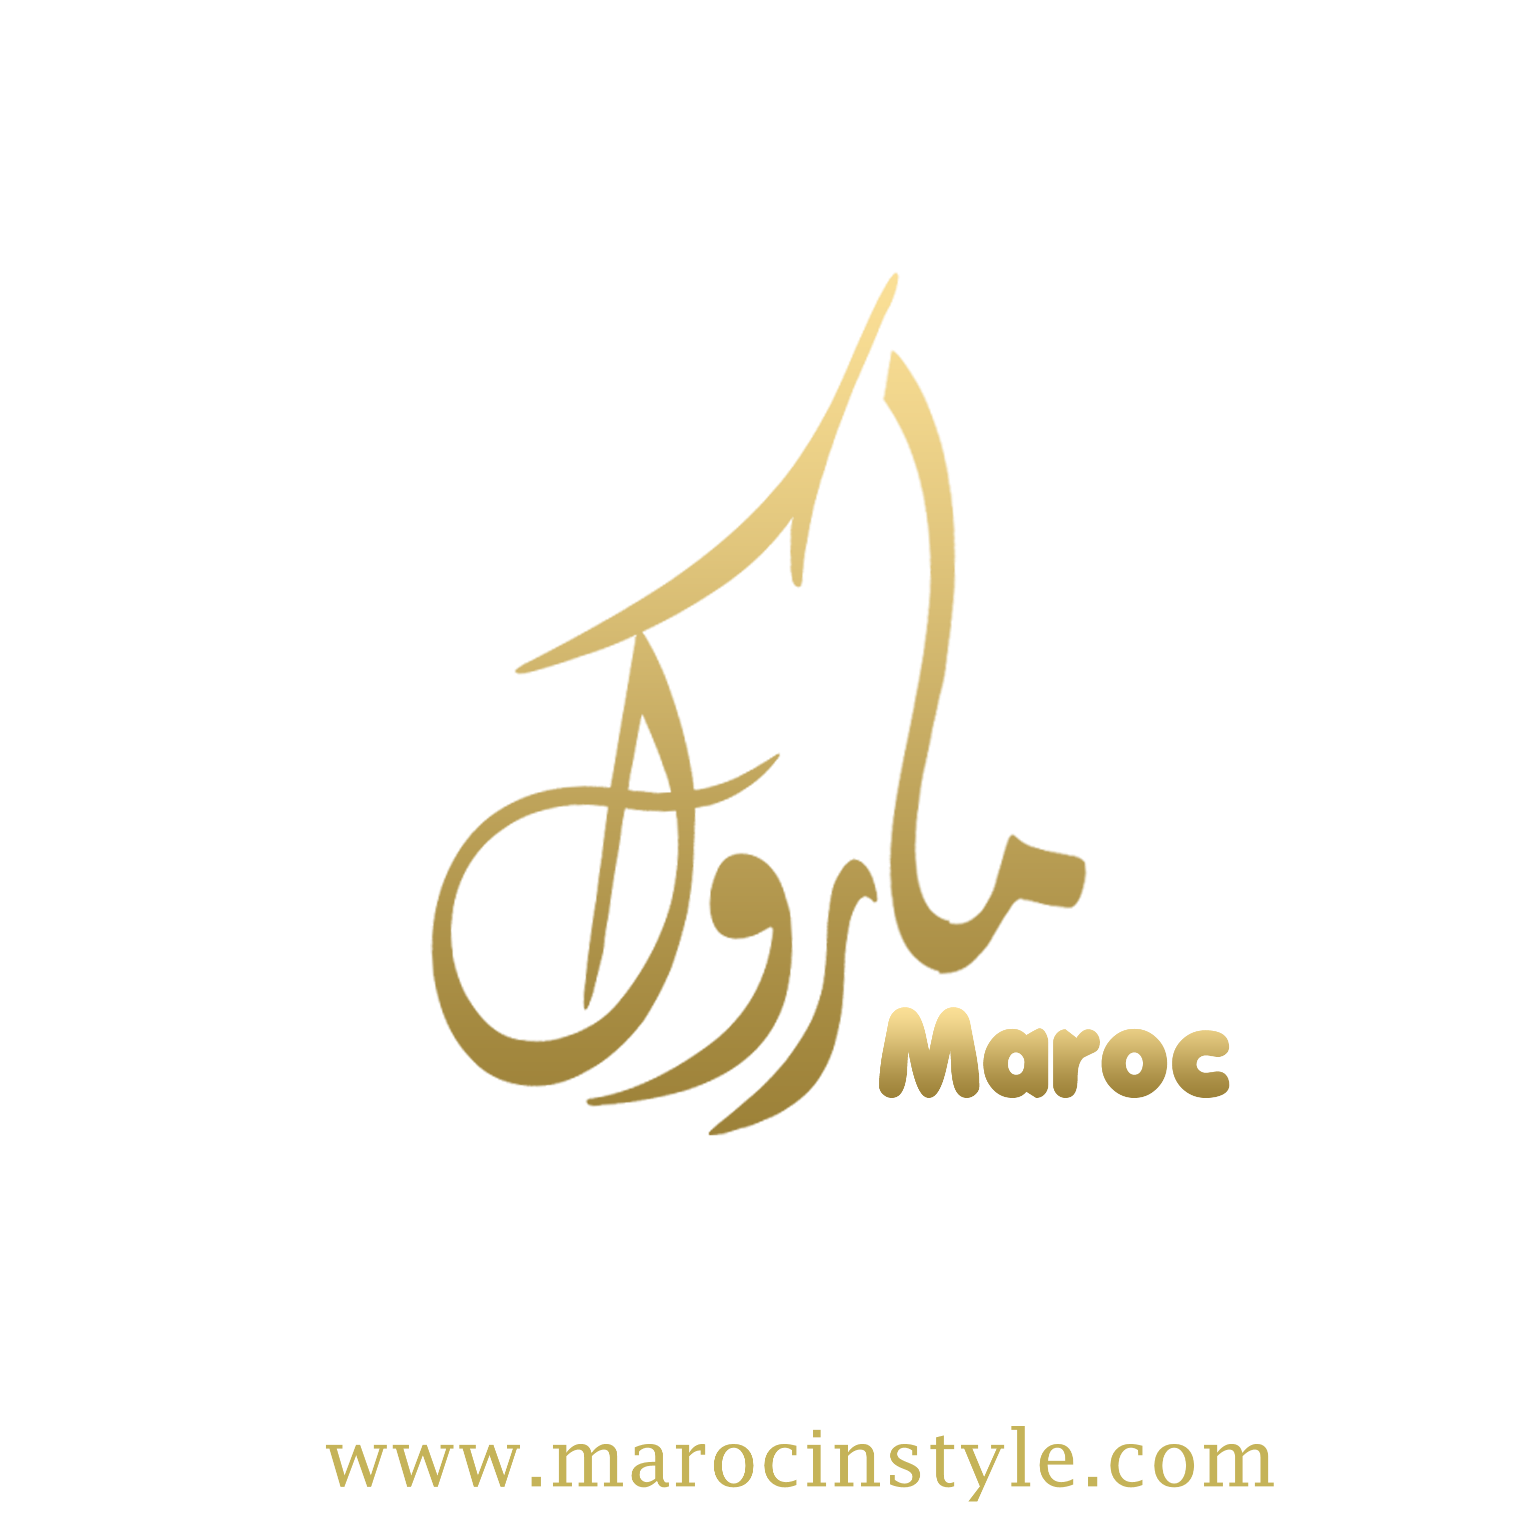 Maroc In Style is the first Moroccan Luxury Label. 
Our mission is to promote Moroccan Luxury around the world.